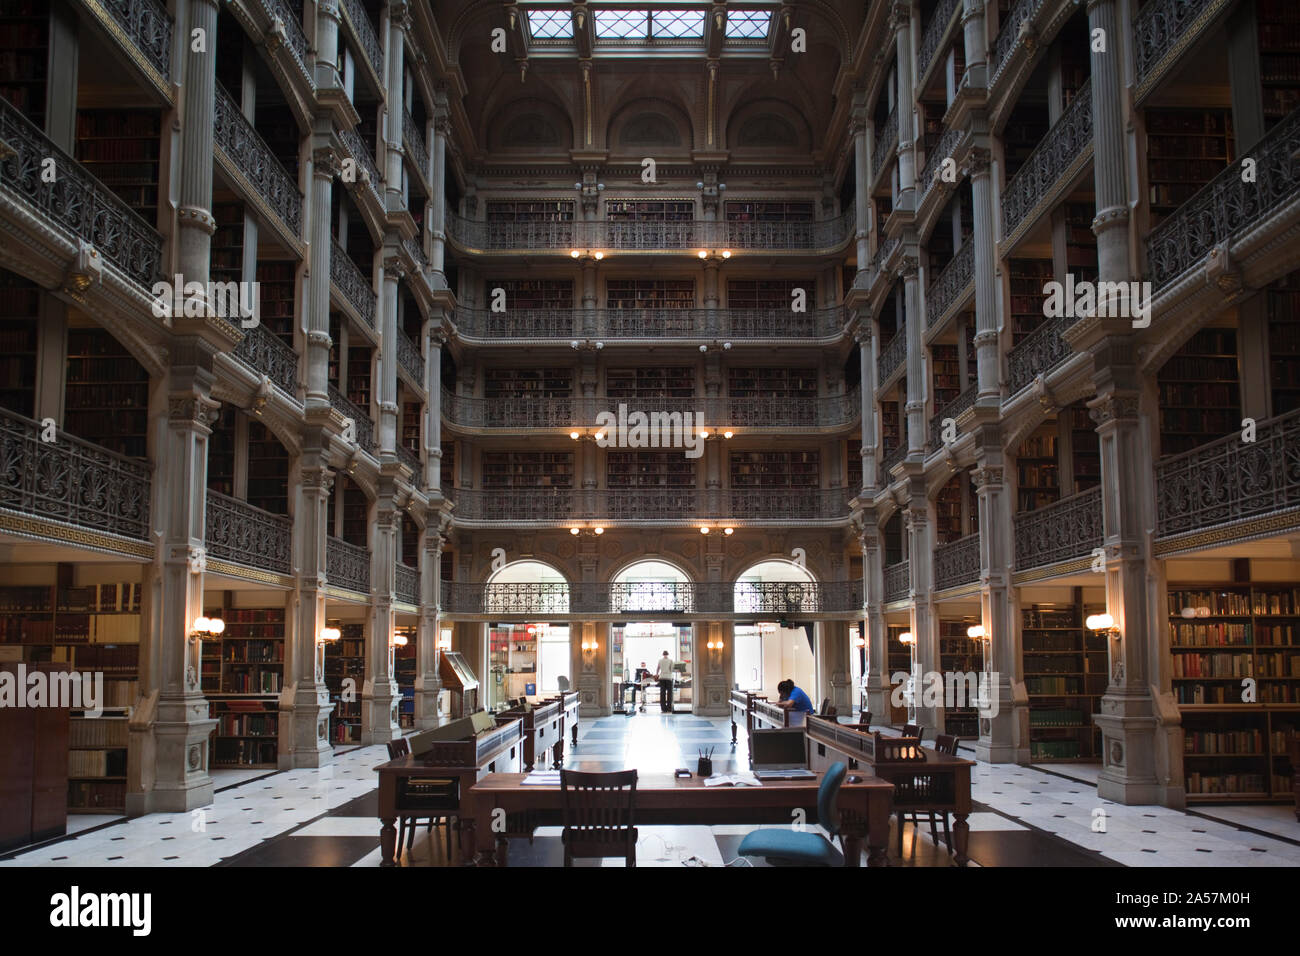 Interiors of a library, Peabody Institute, Johns Hopkins University, Baltimore, Maryland, USA Stock Photo